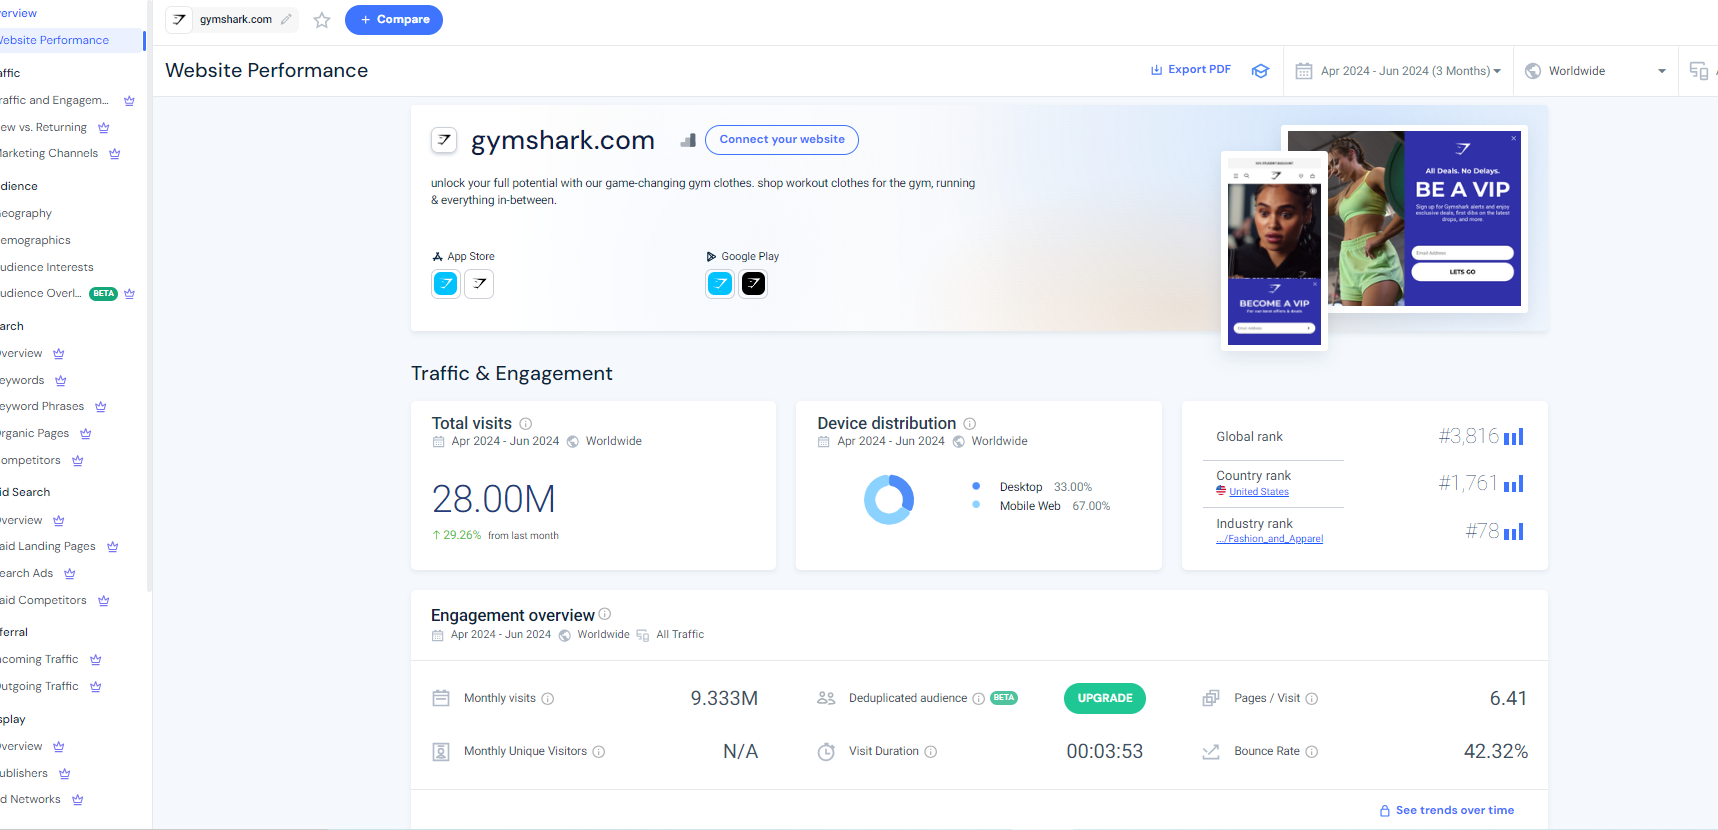 how to make 5k a month gymshark results from similarweb 9.3M montly visits from April to June 2024